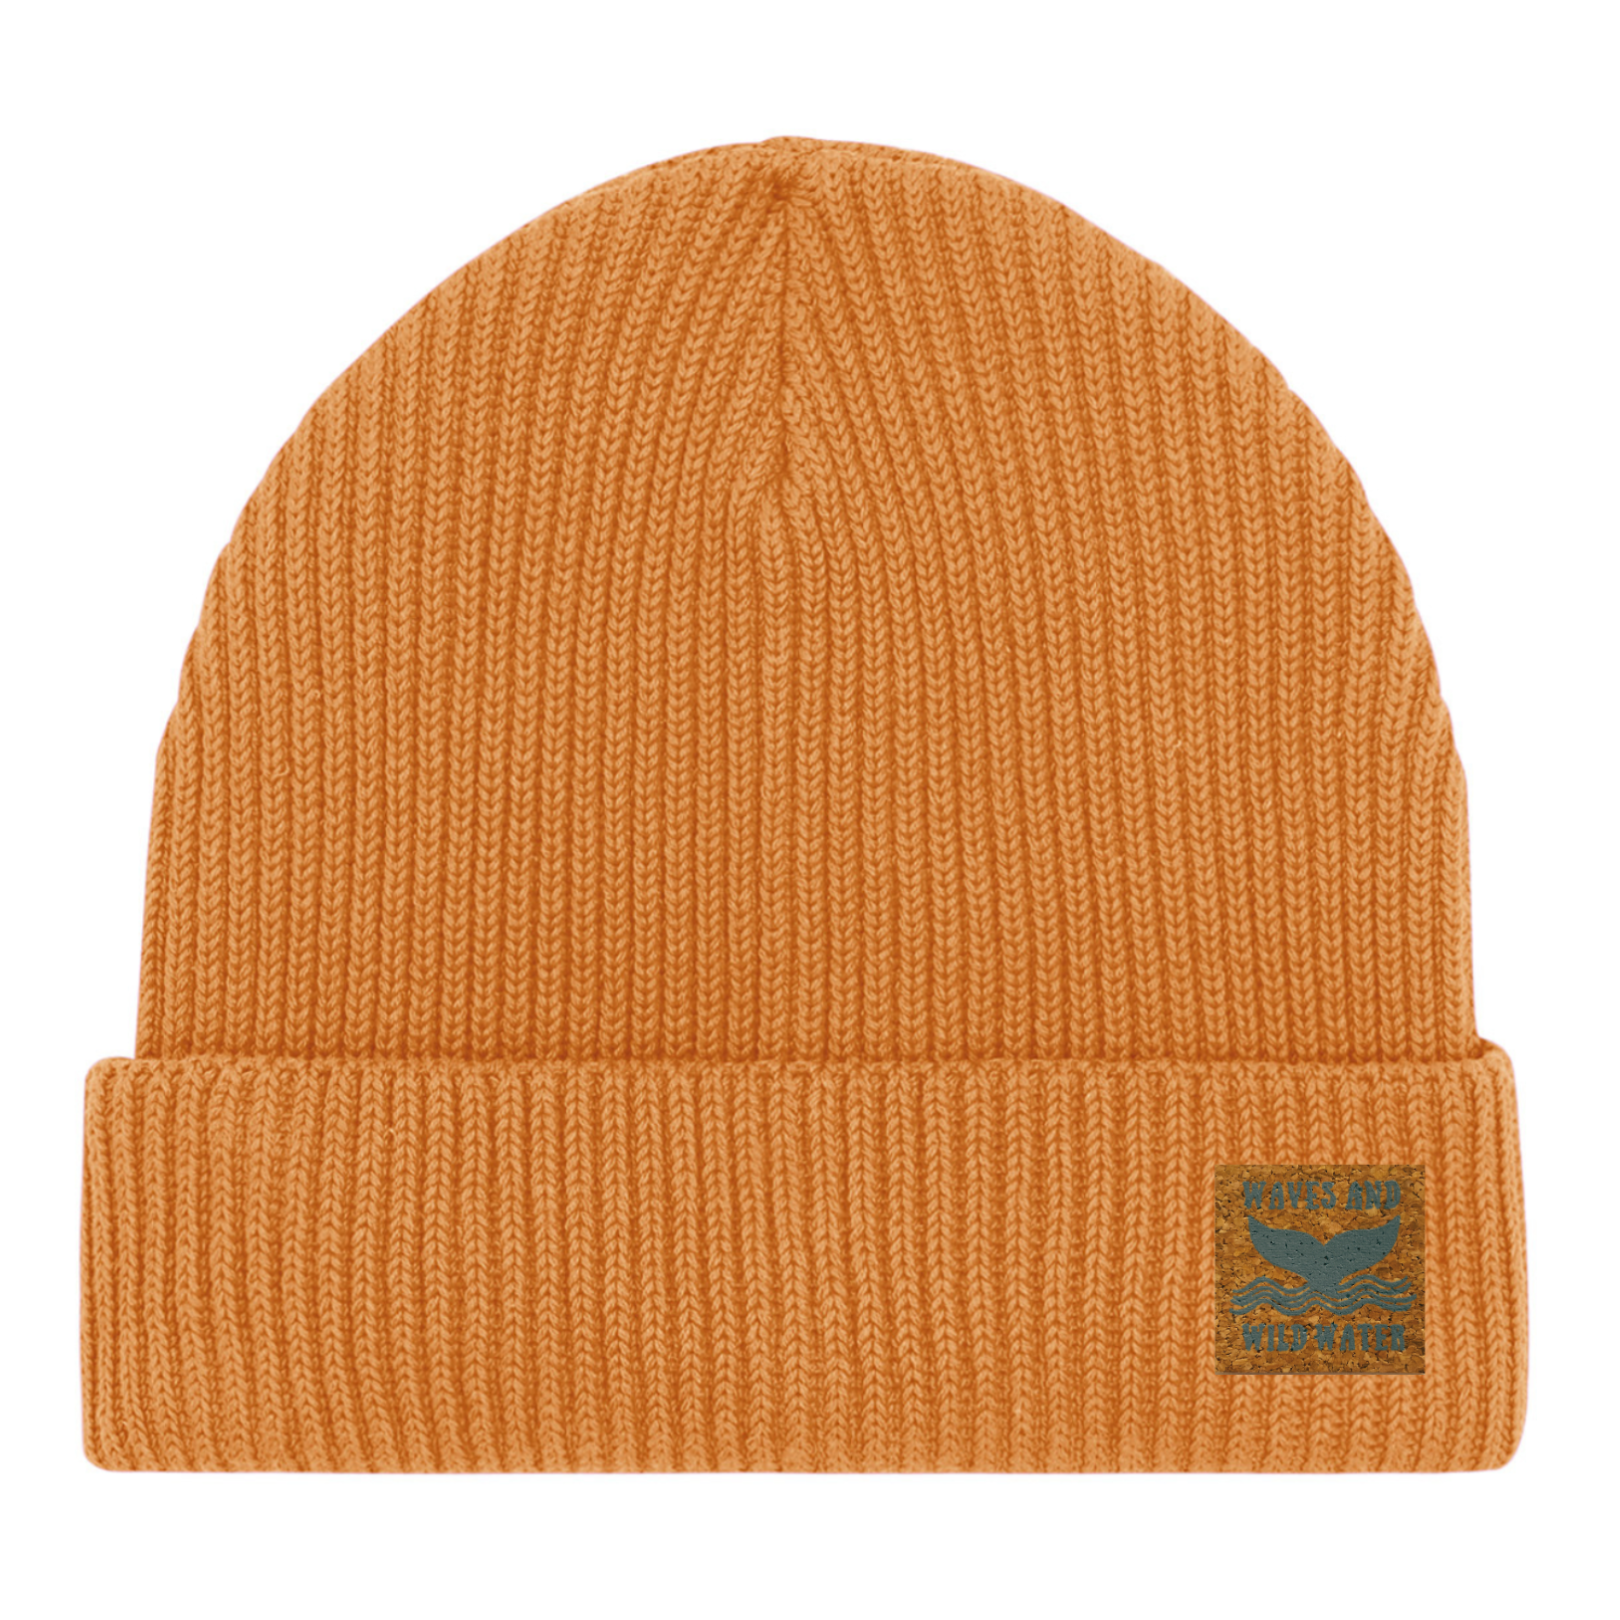 A golden yellow fisherman beanie hat with a Waves & Wild Water label. 